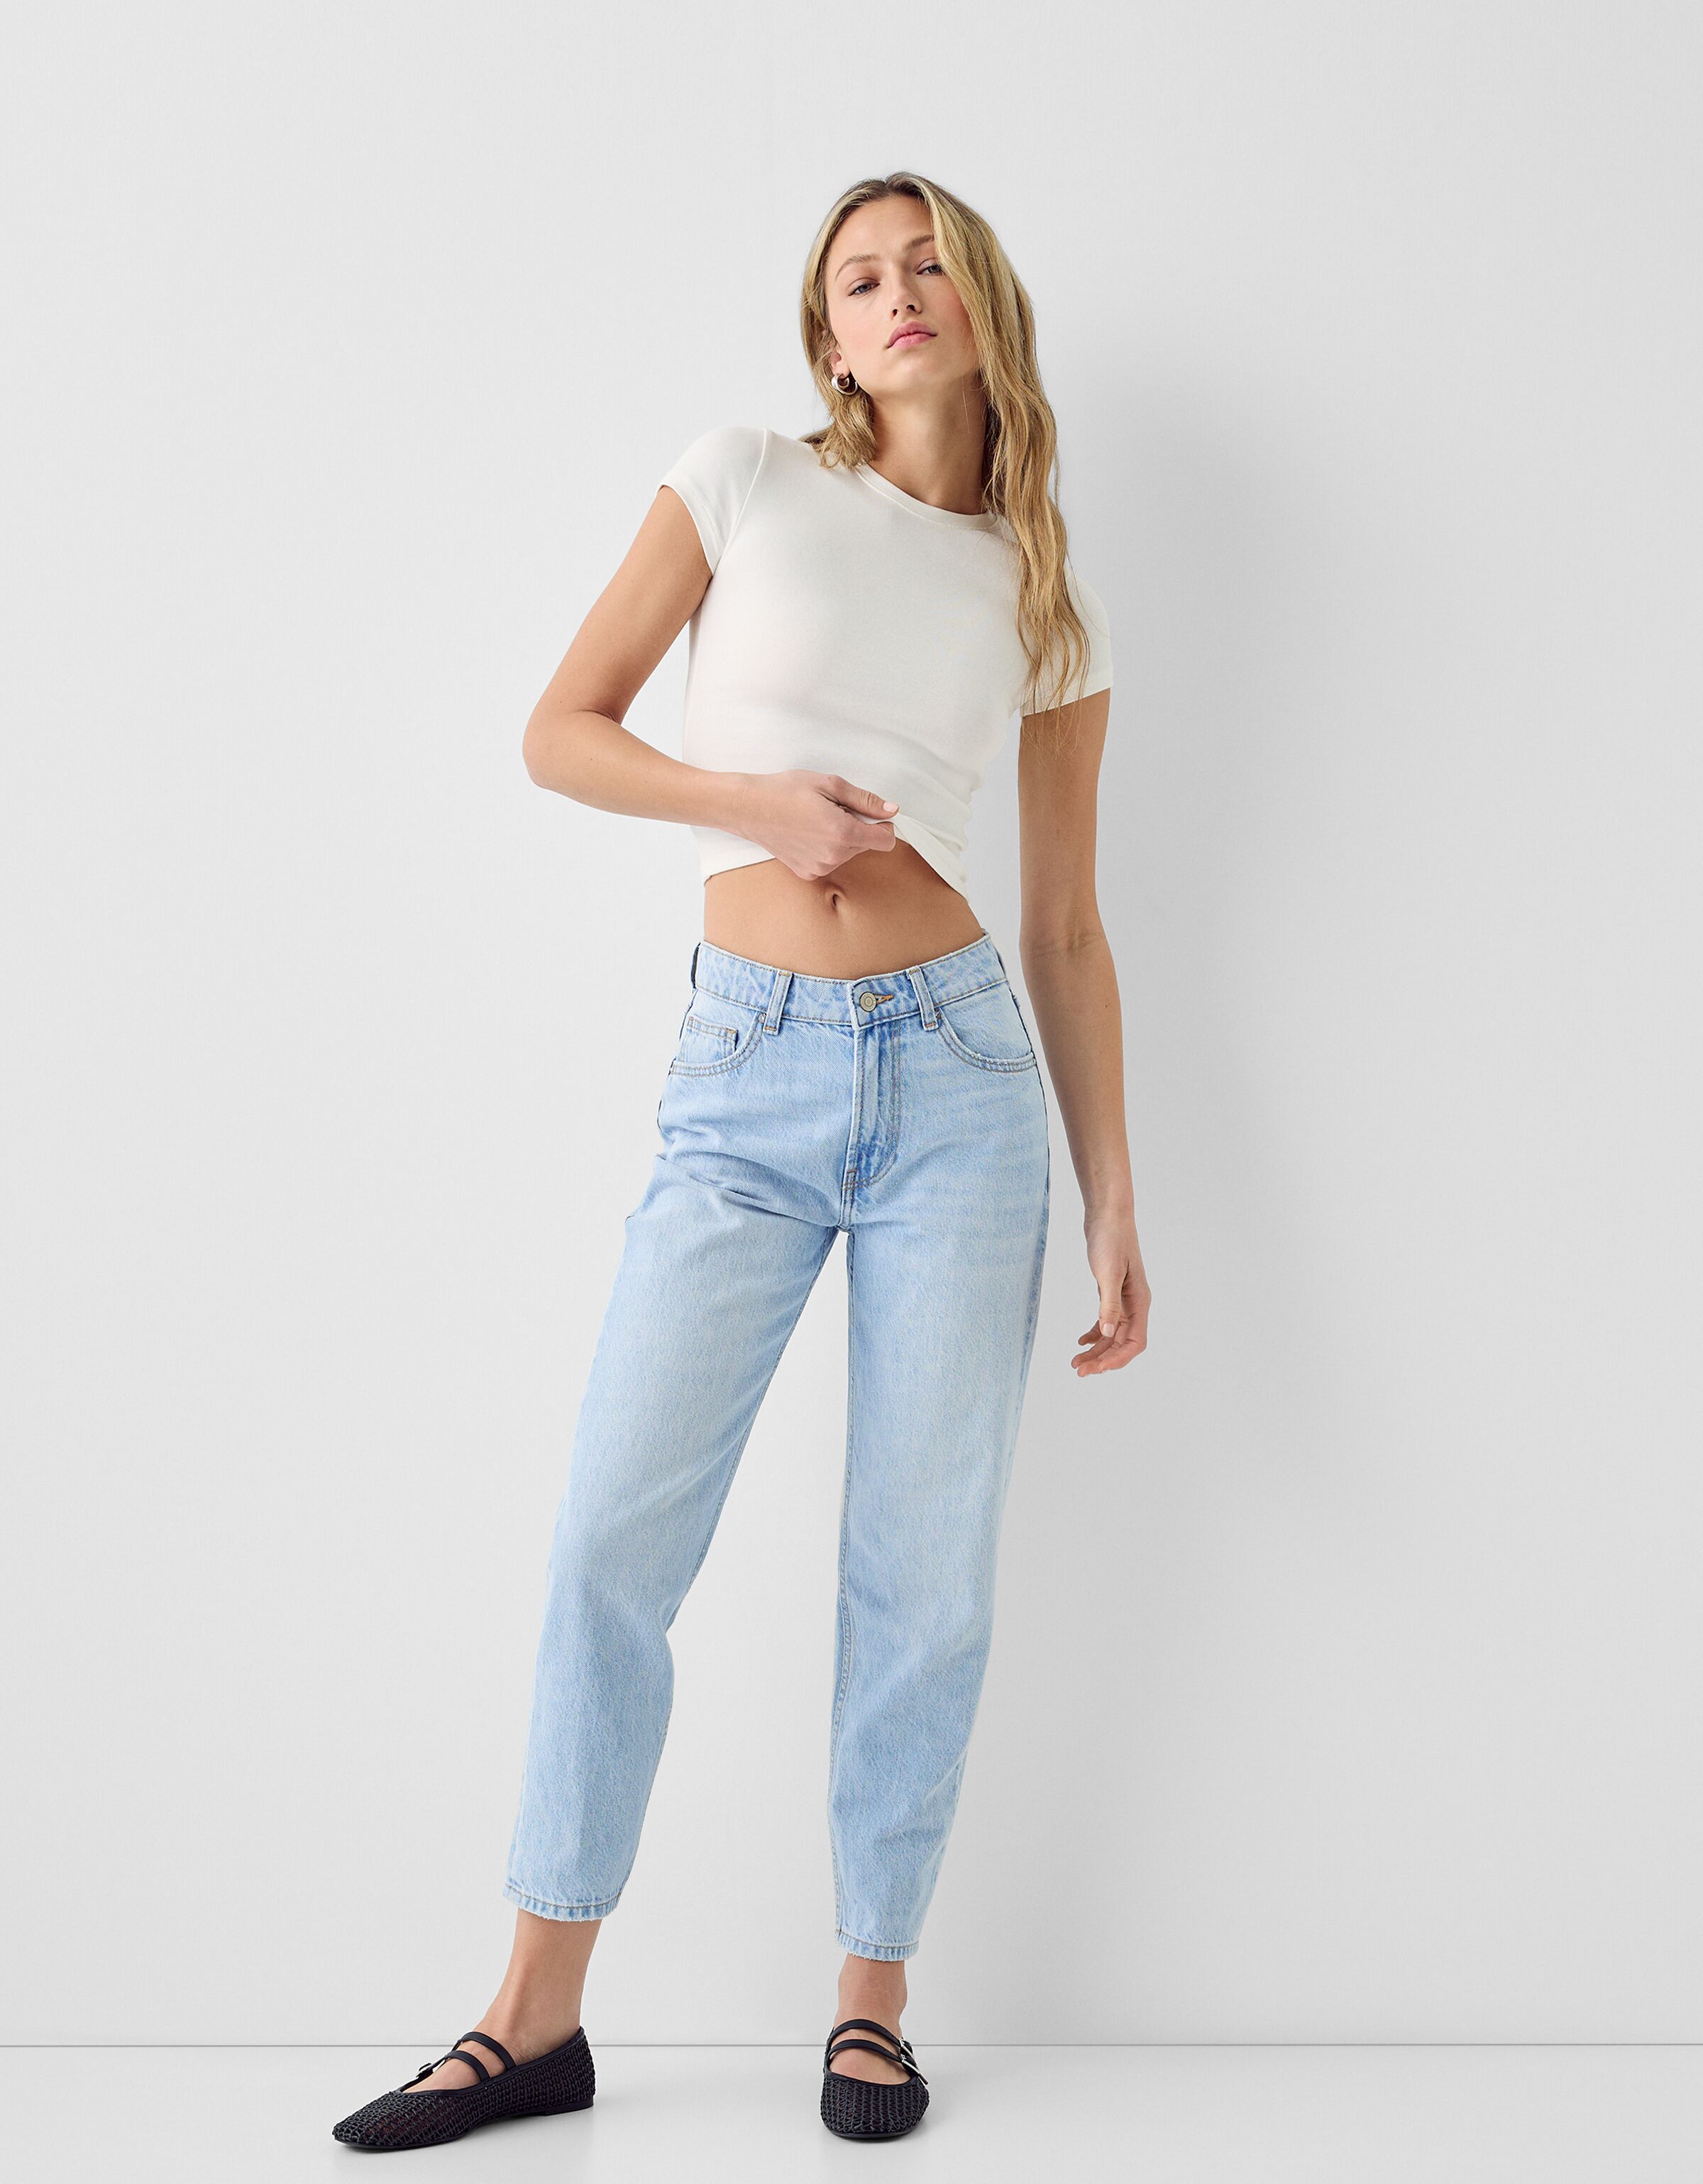 Mom Jeans - High-waisted, Ripped & More | Tommy Hilfiger® DK